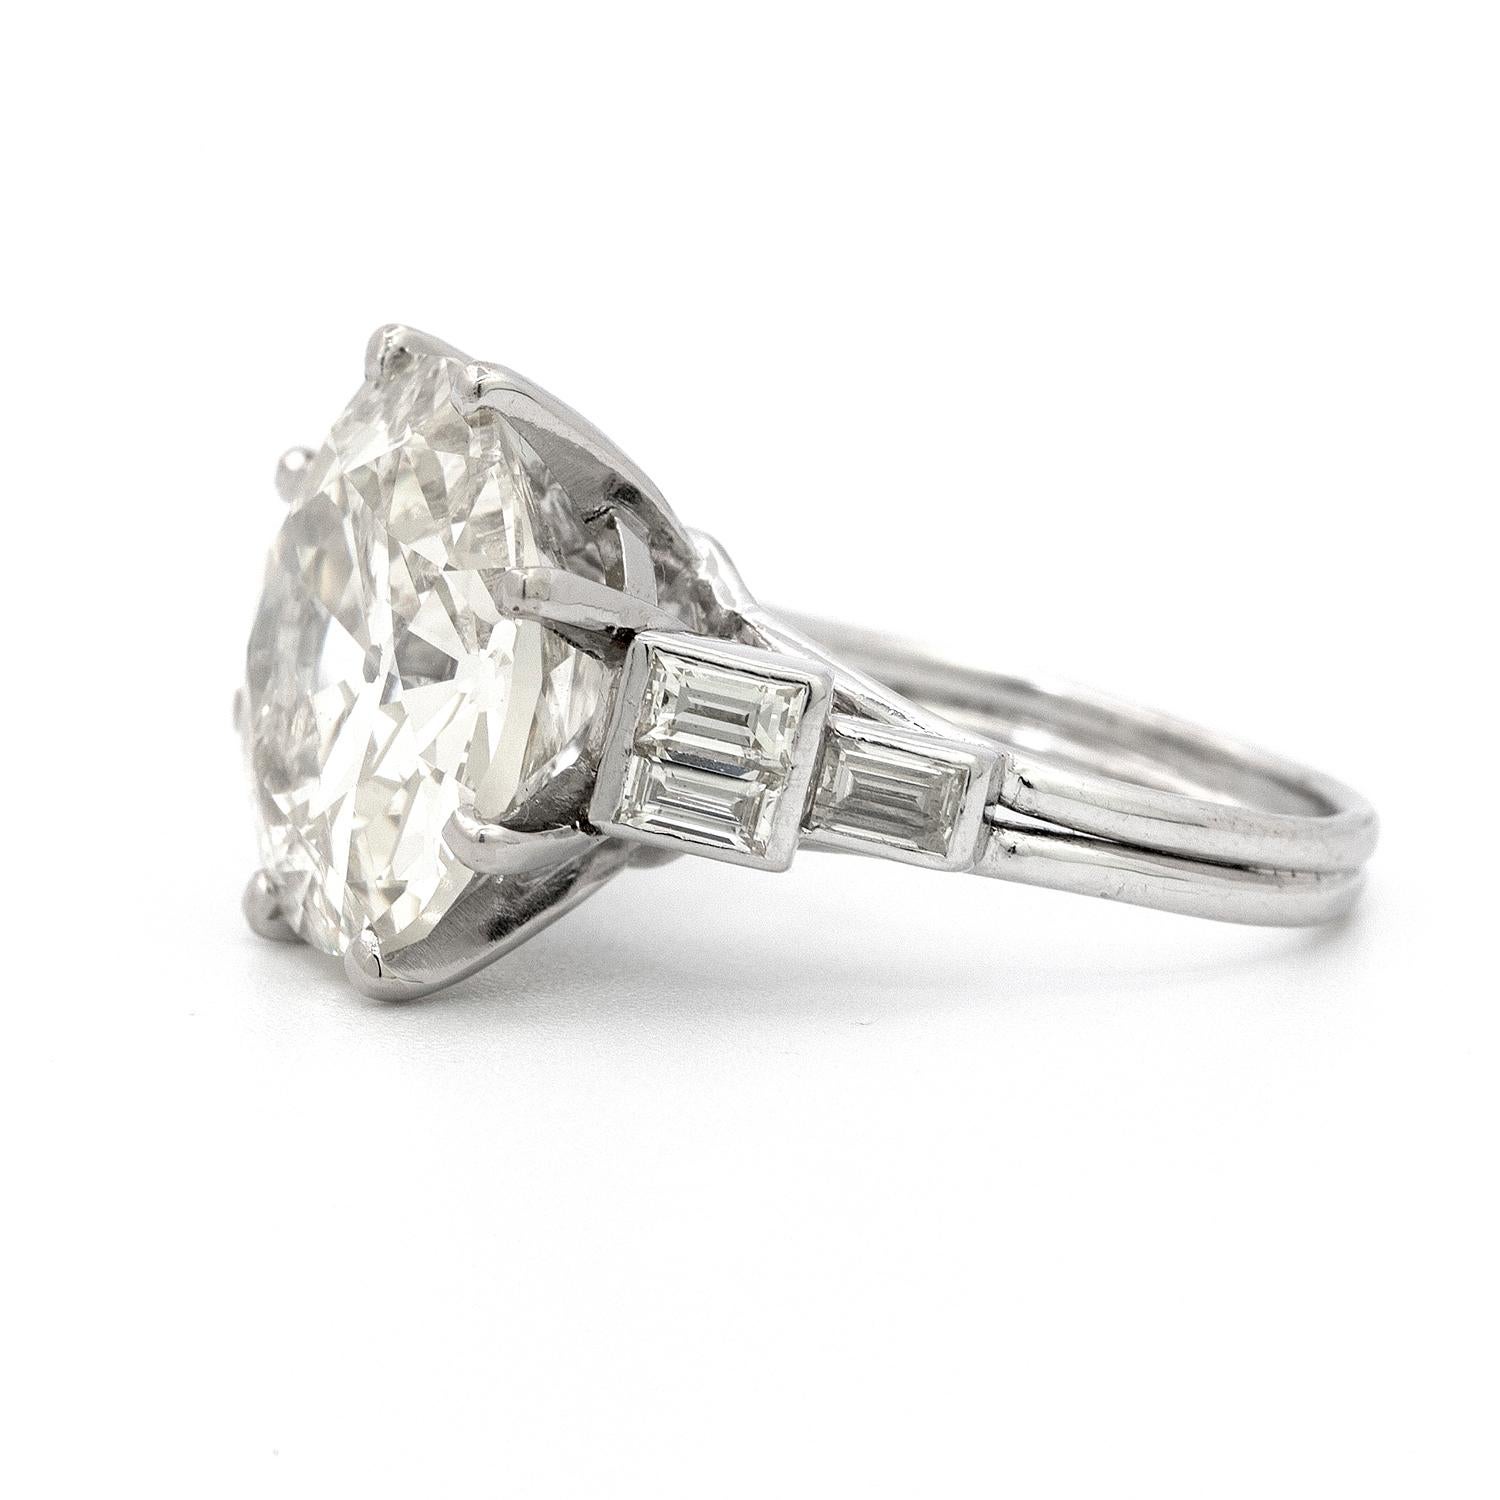 9.58 Carat Old European Cut Diamond Ring In Good Condition For Sale In New York, NY